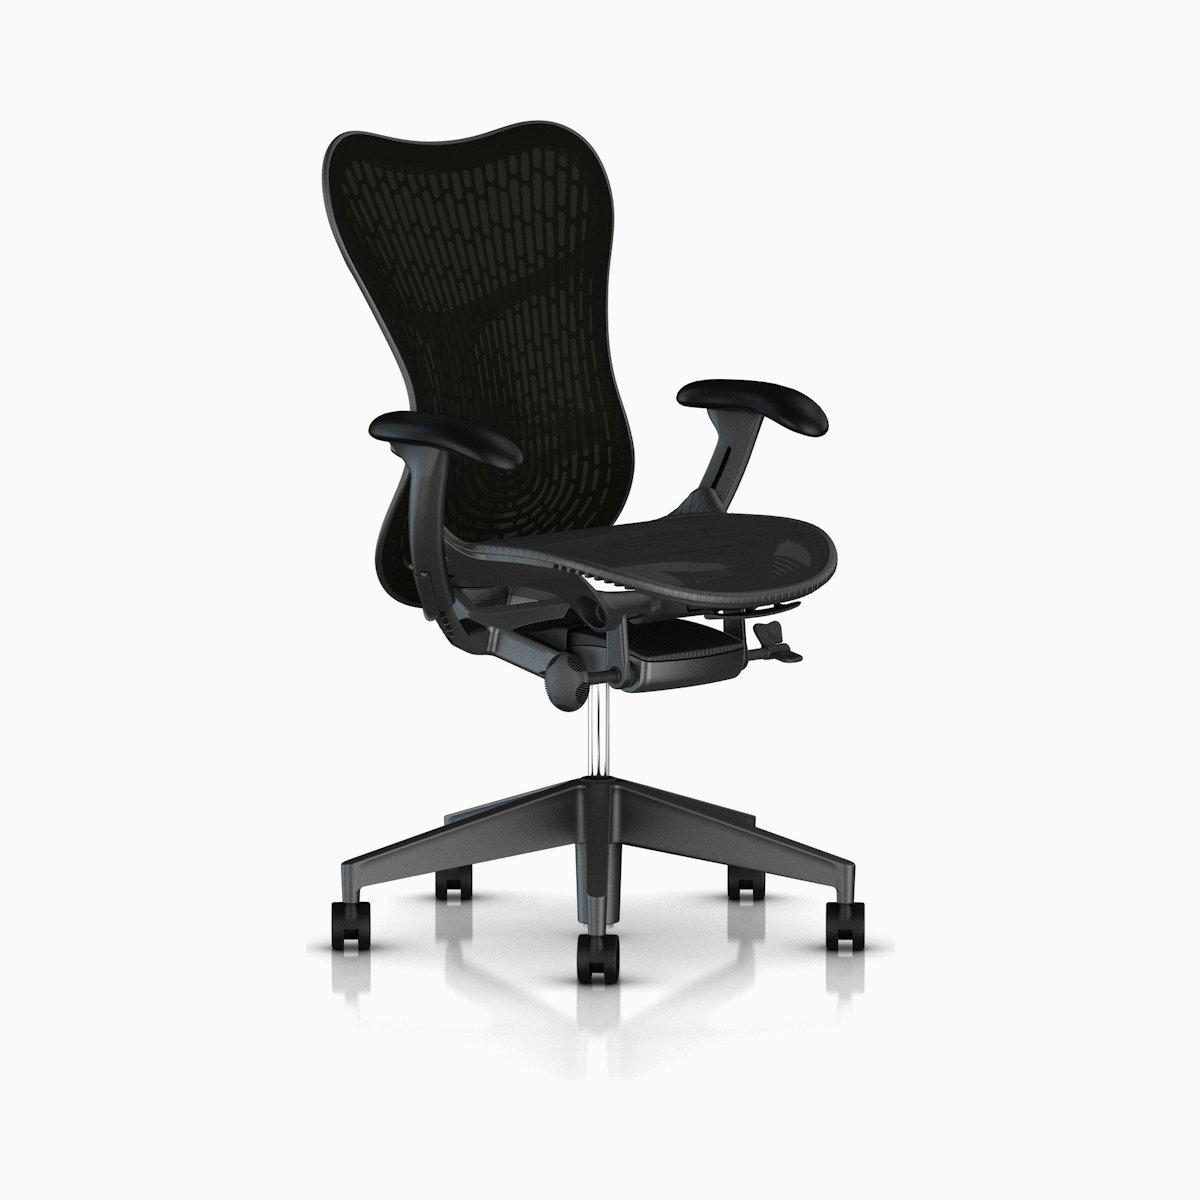 Ergonomic Home Office Chairs: Performance Seating - Herman Miller 